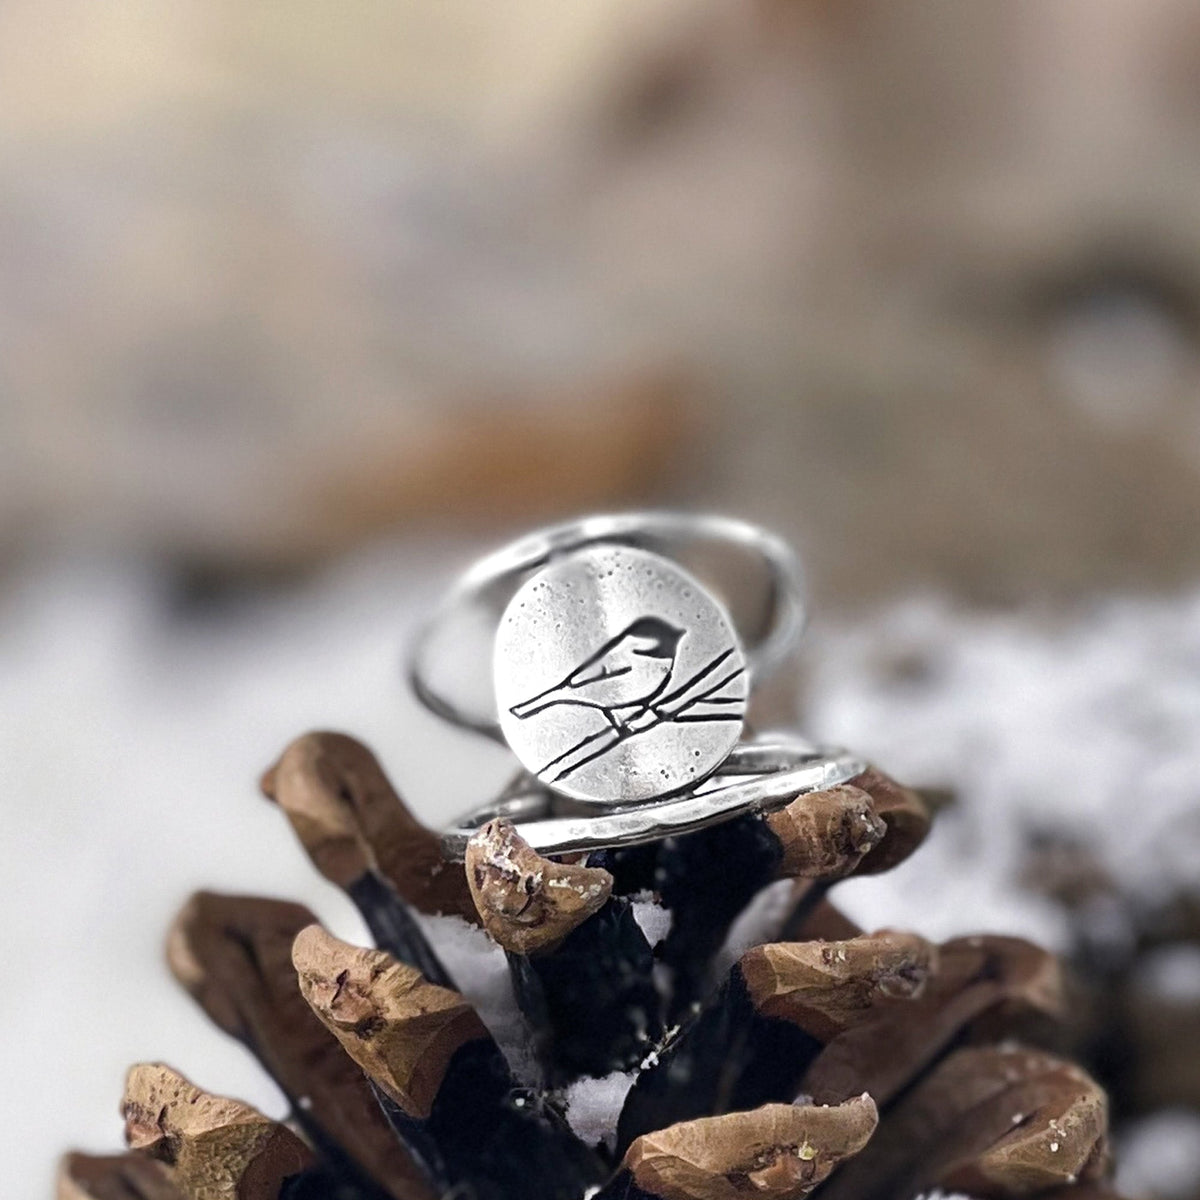 Perched Chickadee Ring - Ring Select Size 4 7137 - handmade by Beth Millner Jewelry